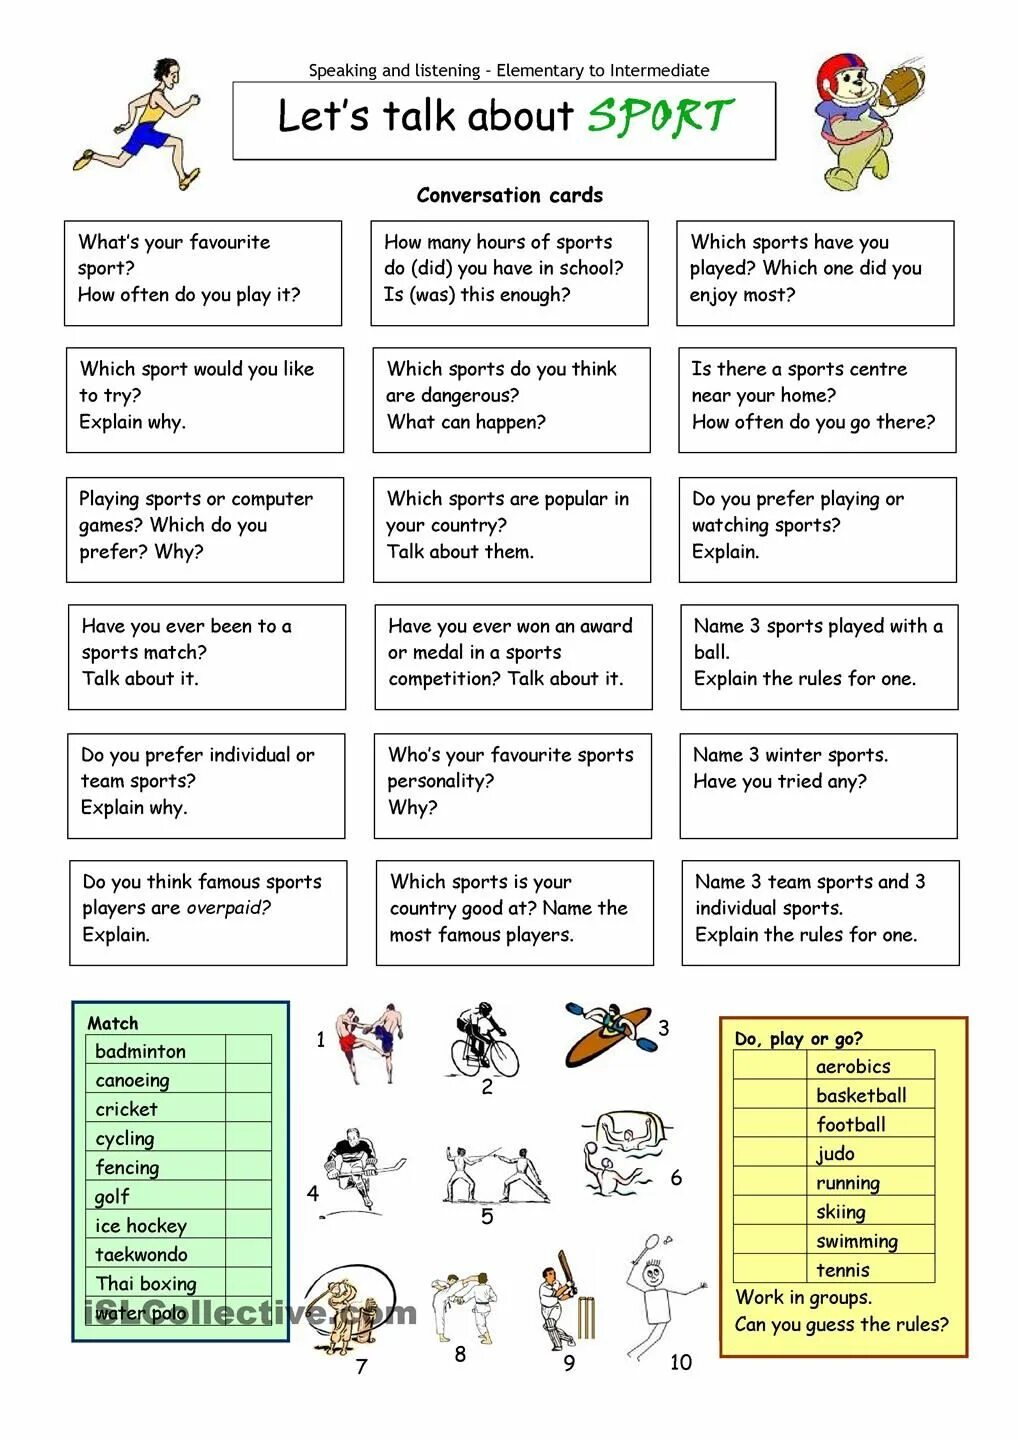 Английский speaking Worksheet. Lets talk about Sport. Карточки для speaking. Спорт английский Worksheet. Listening and doing games